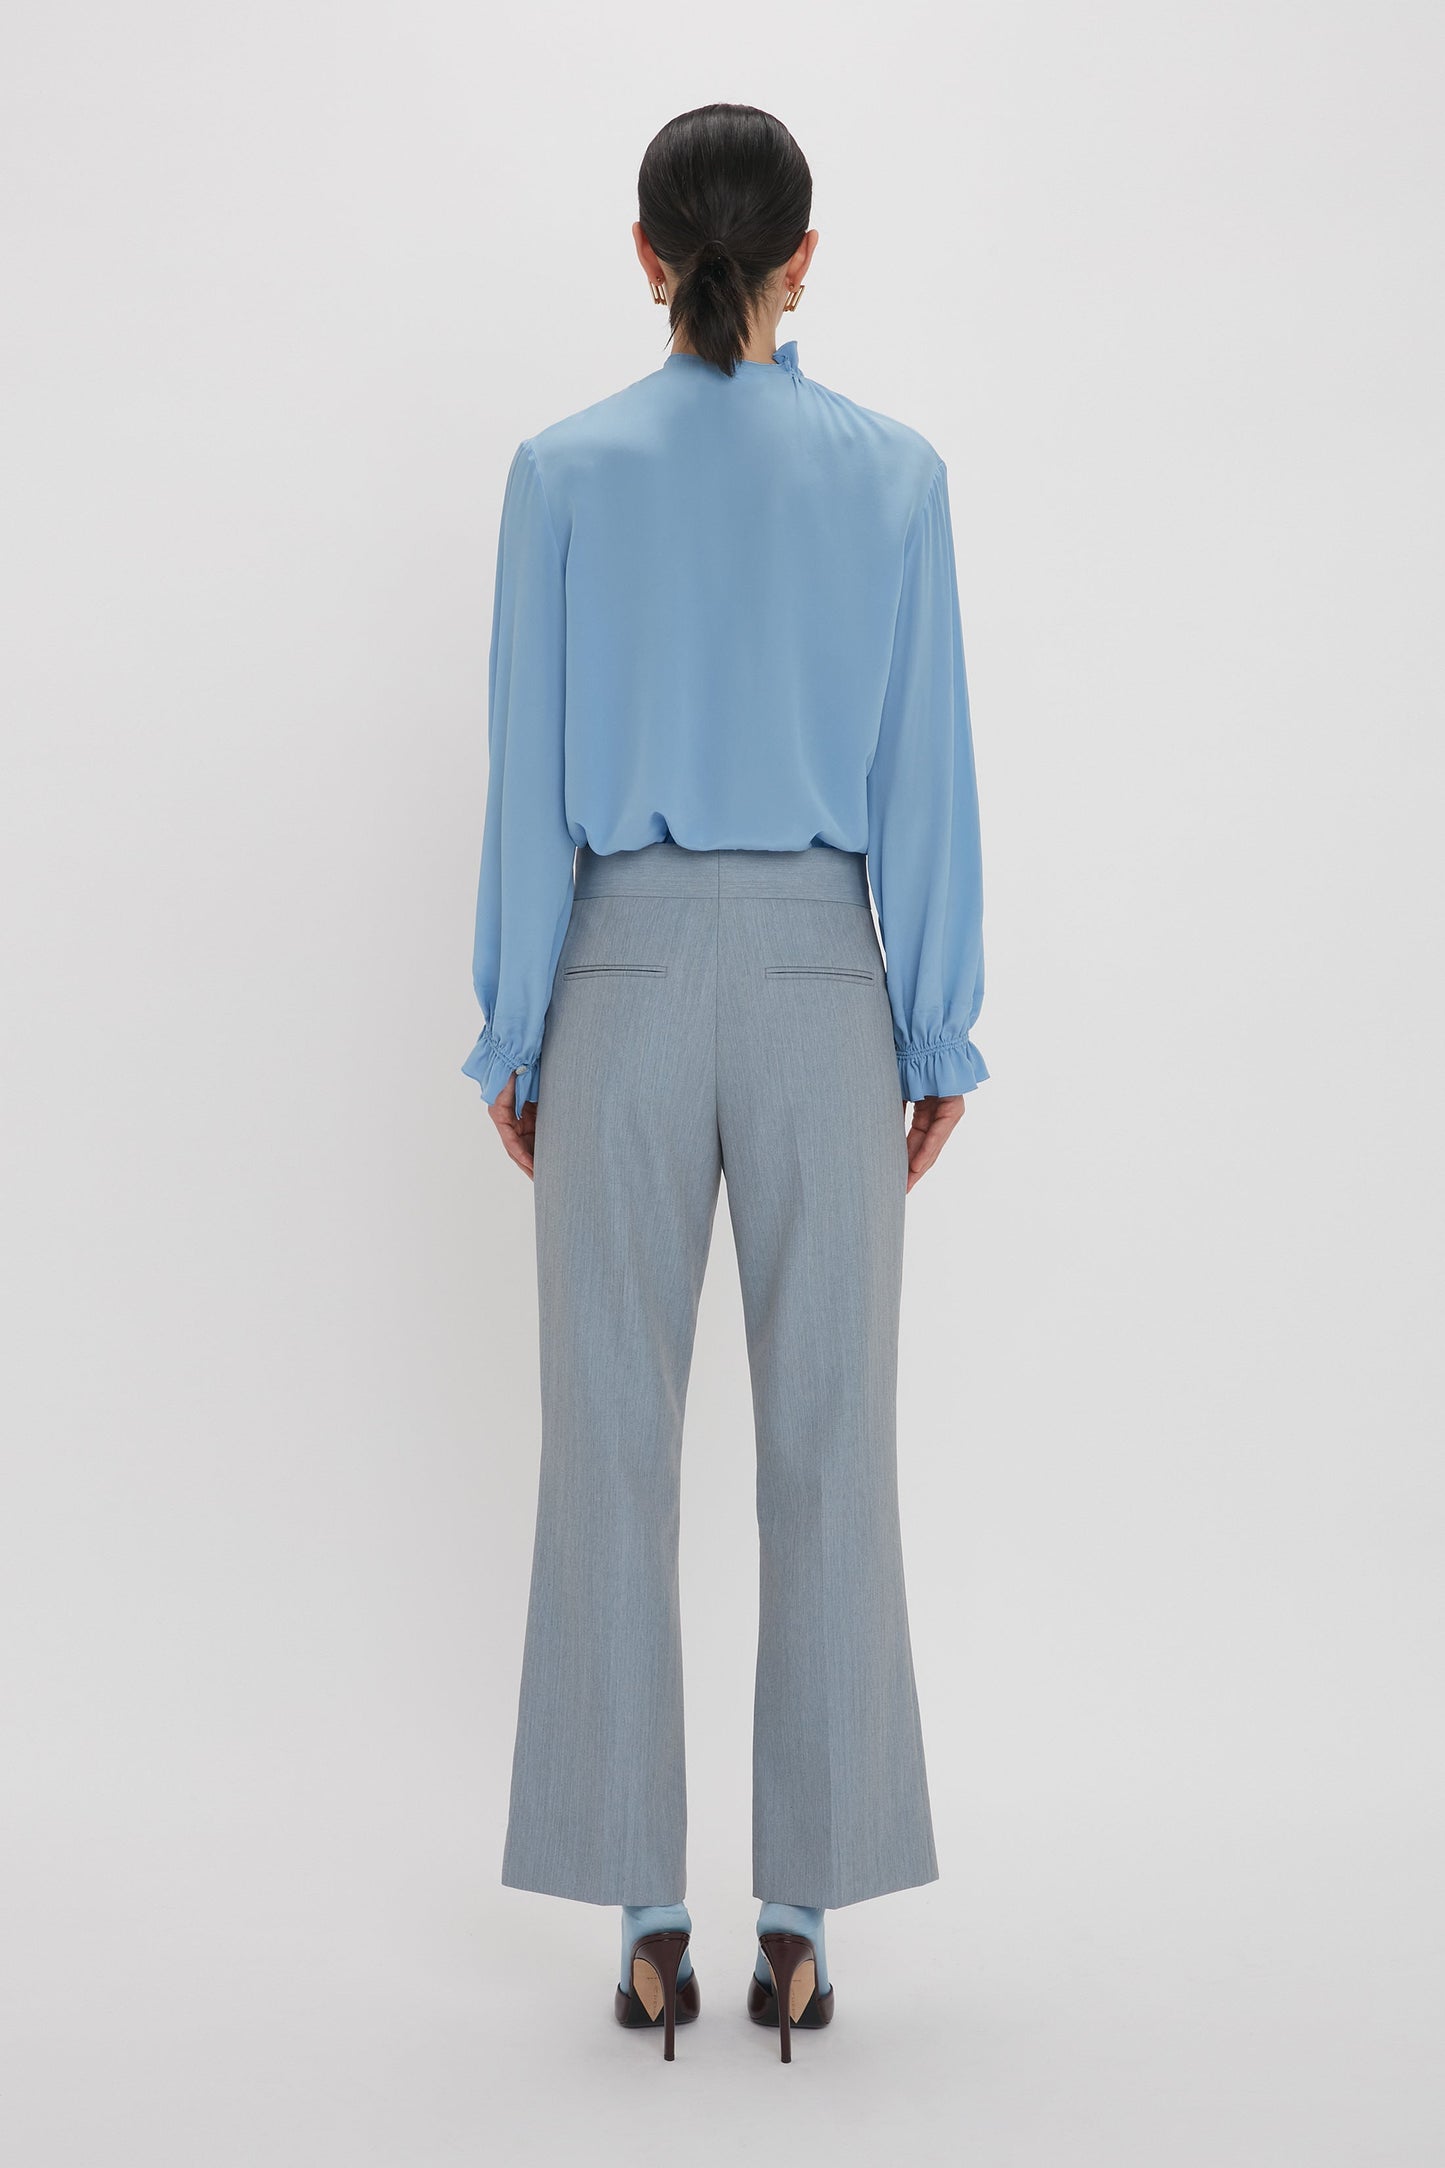 A person with dark hair is standing facing away, wearing the Victoria Beckham Exclusive Ruffle Neck Blouse In Cornflower Blue and grey high-waisted trousers with a slight flare at the bottom, paired with dark heels.